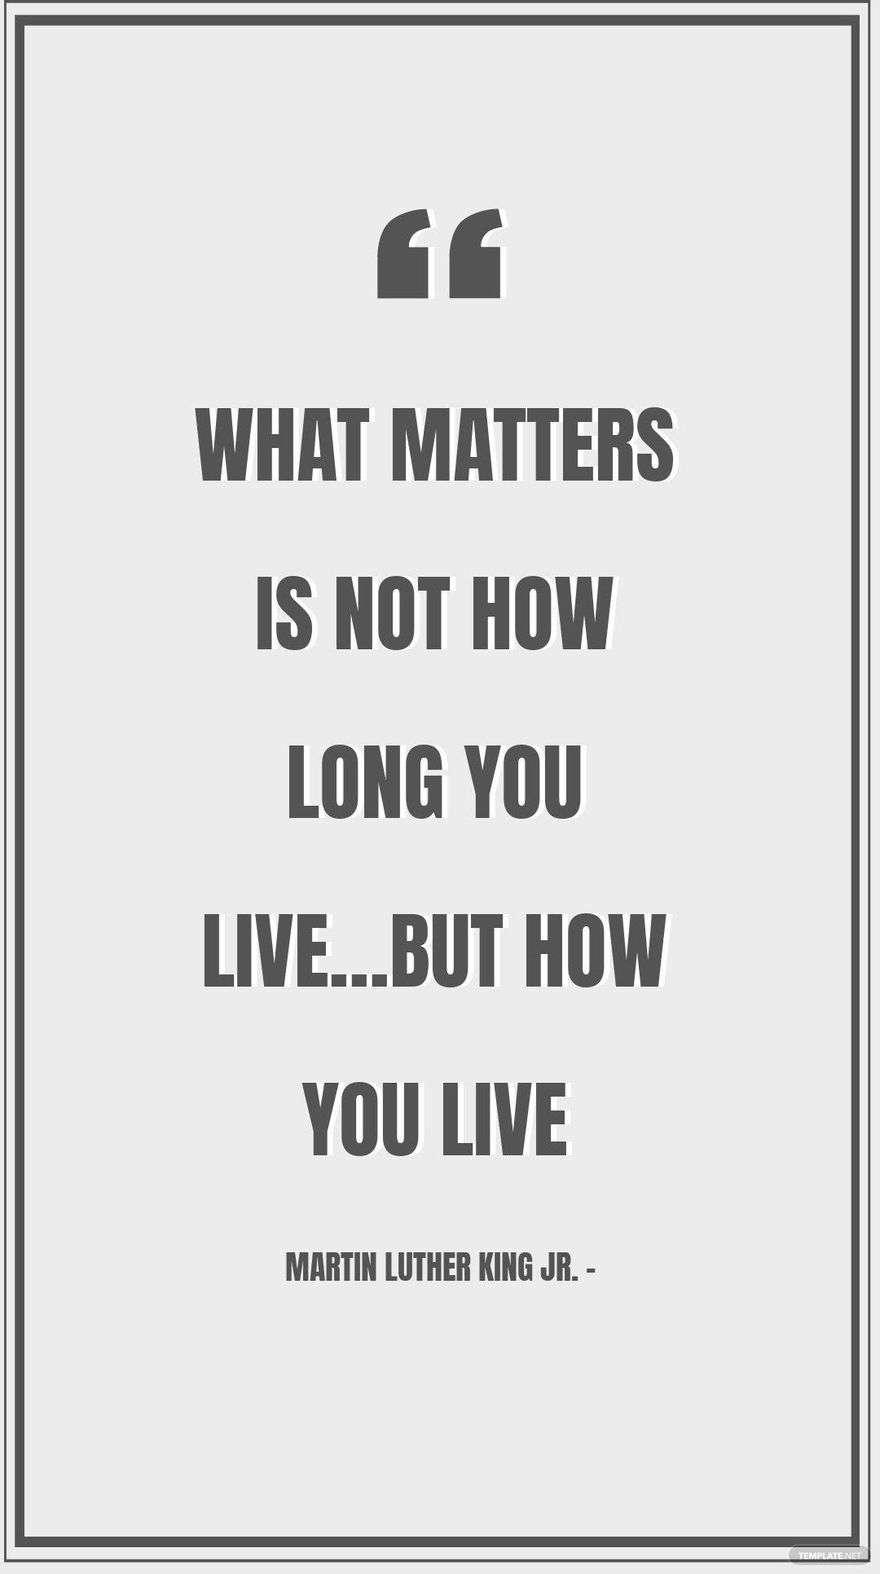 Martin Luther King Jr. - What matters is not how long you live…but how you live